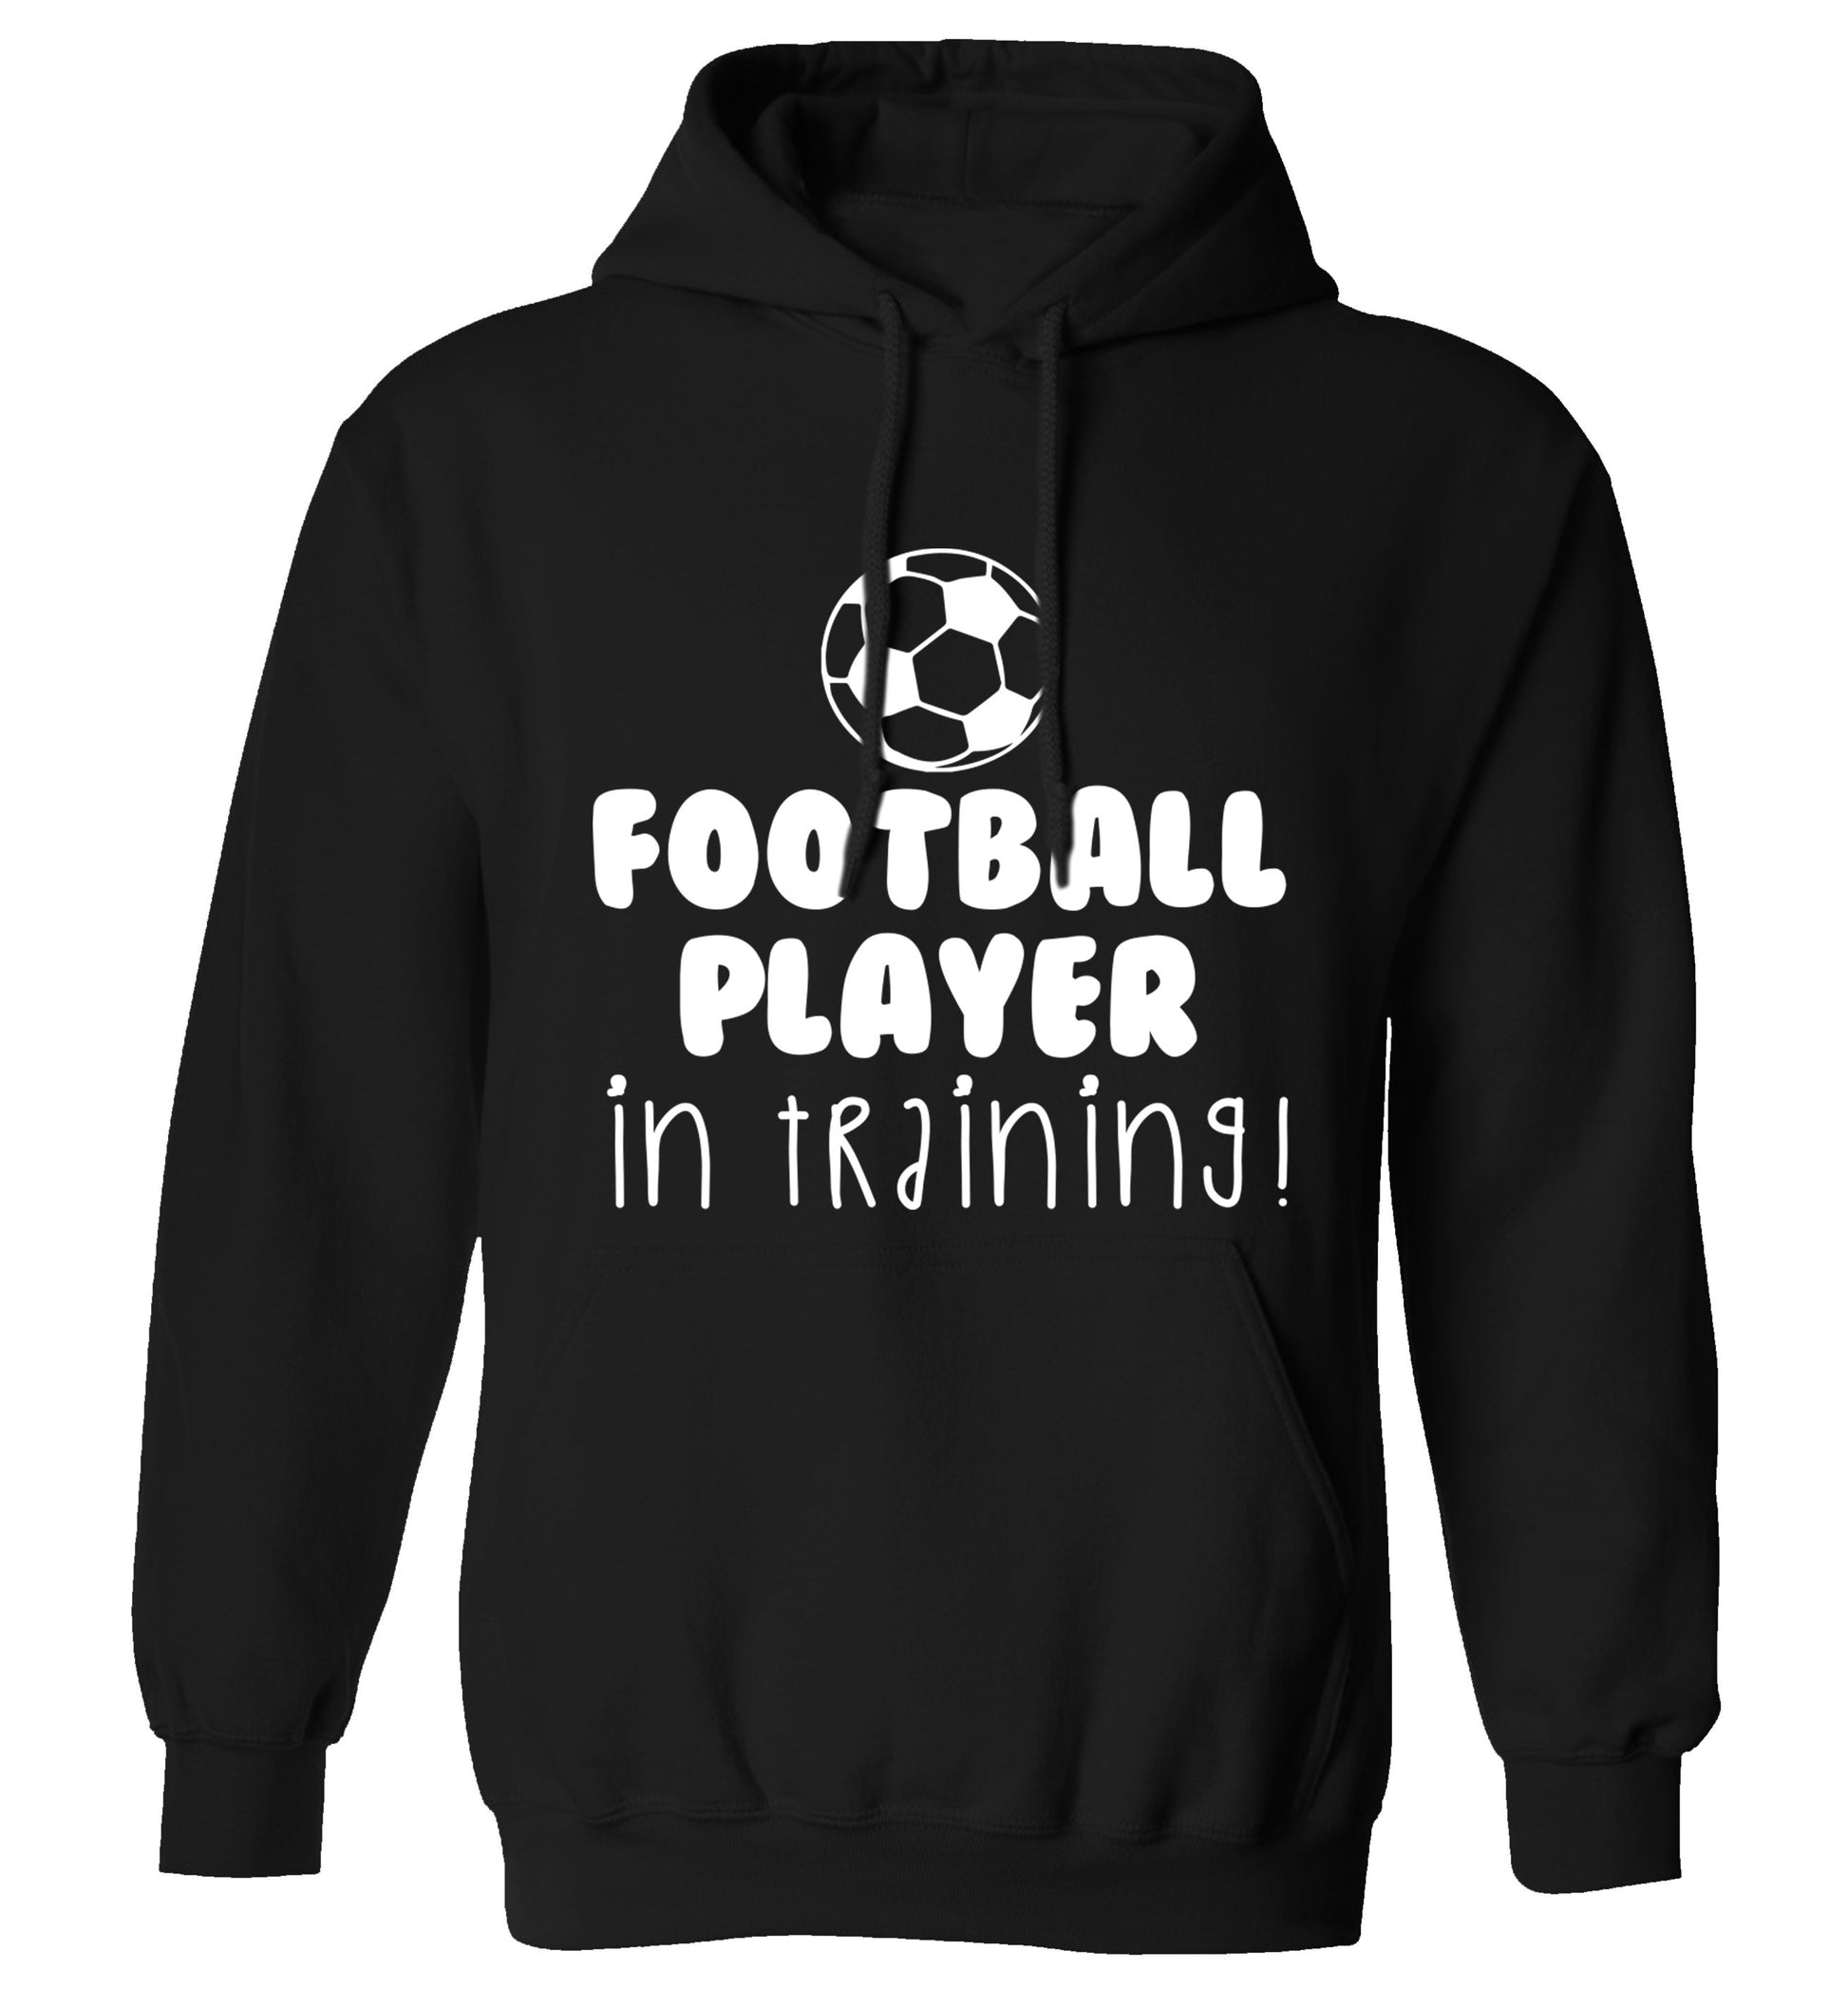 Football player in training adults unisex black hoodie 2XL